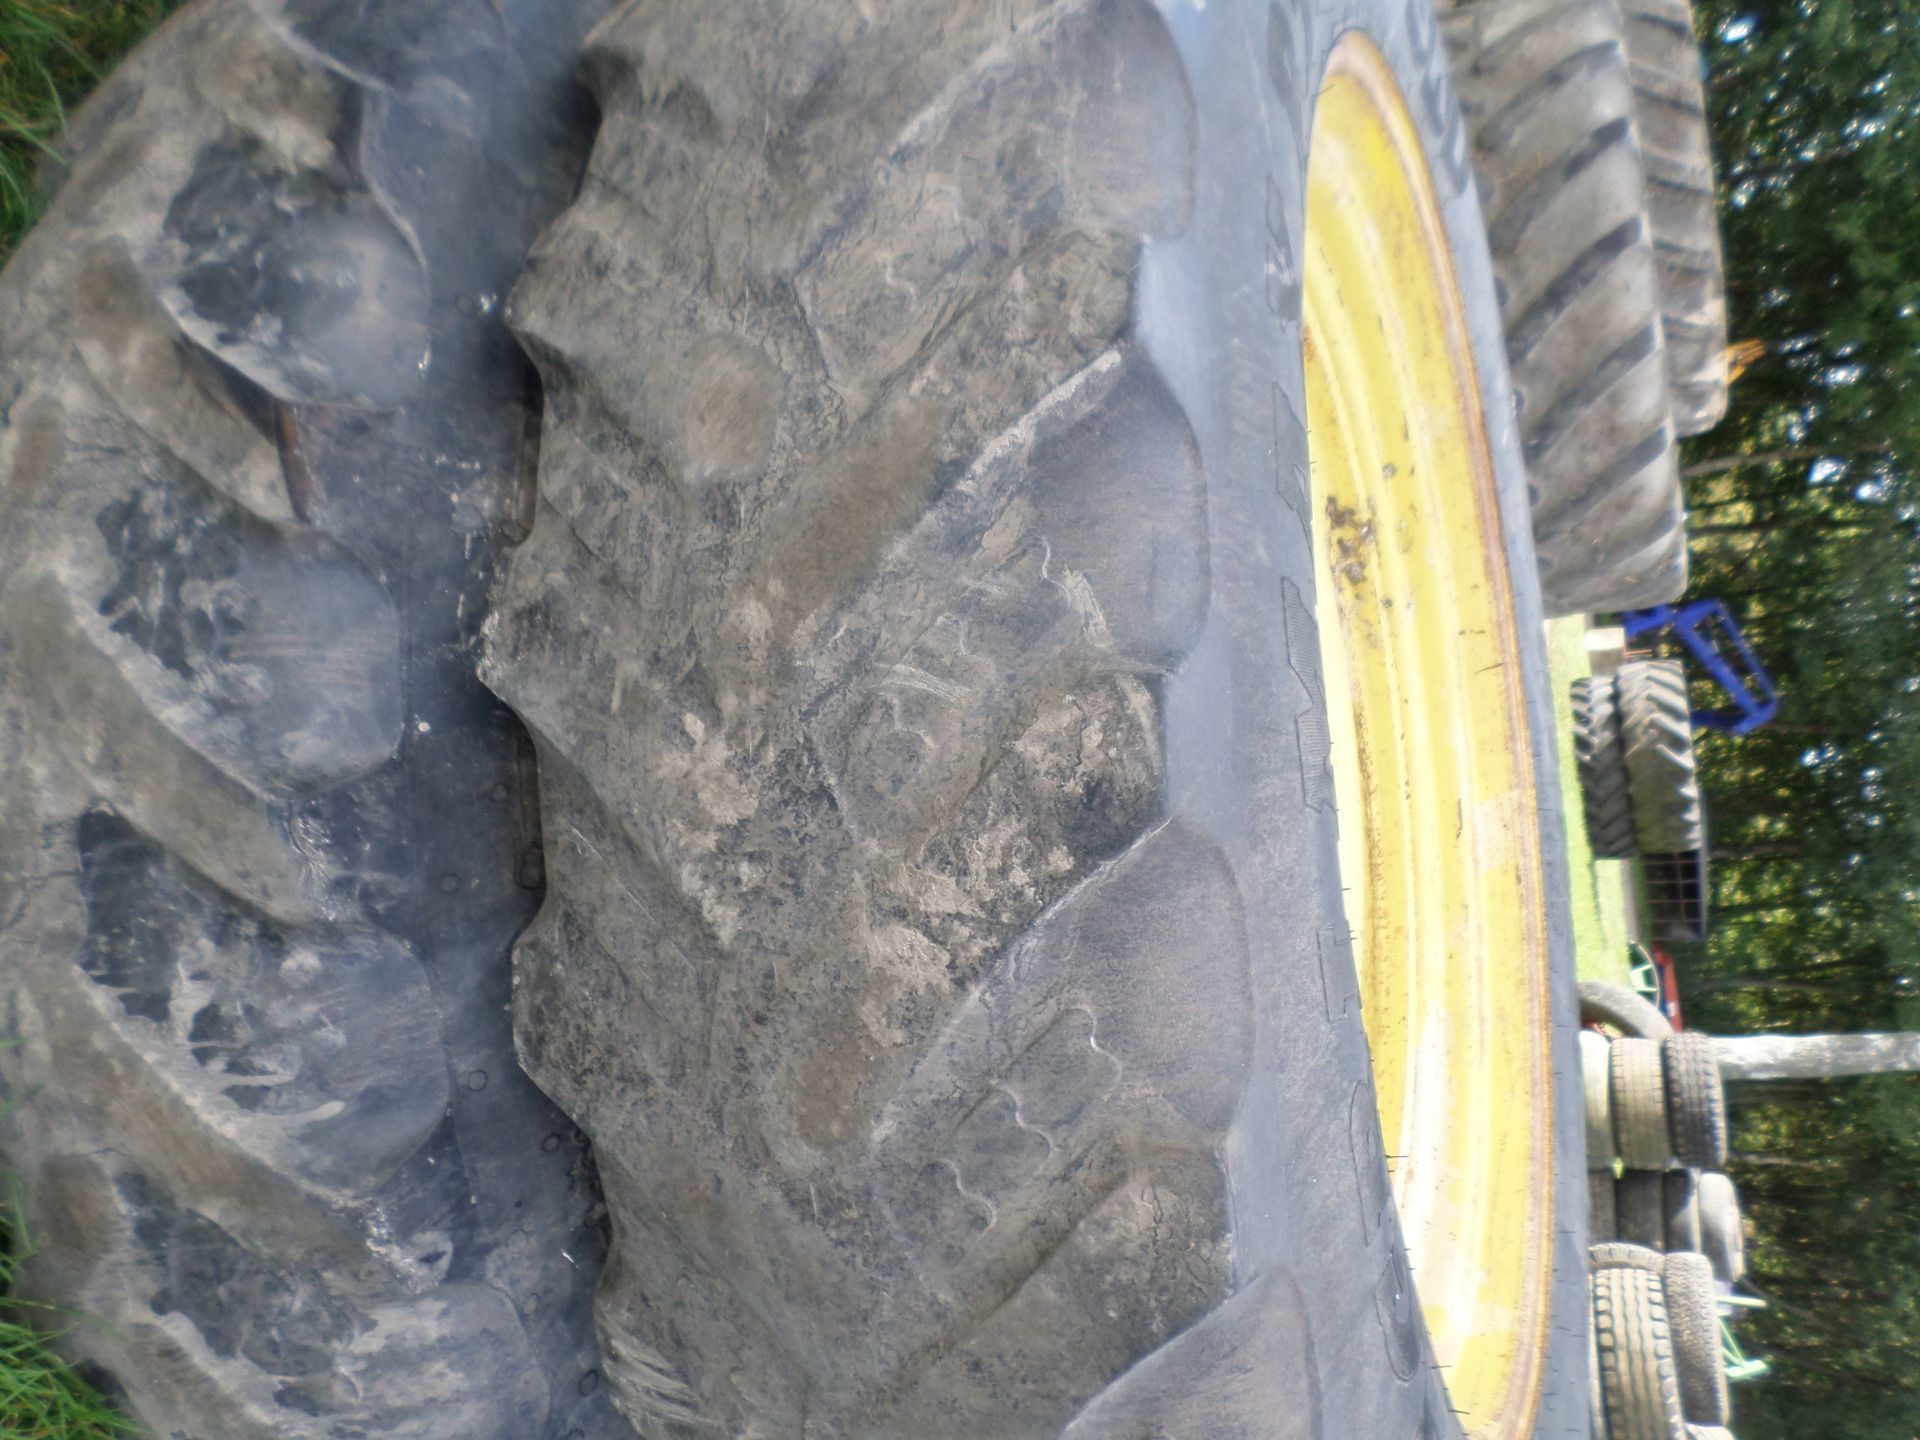 Set of 4 John Deere fixed centre row crop wheels to fit 6020/6030 series, 380/90/46 rears and 380/ - Image 3 of 5